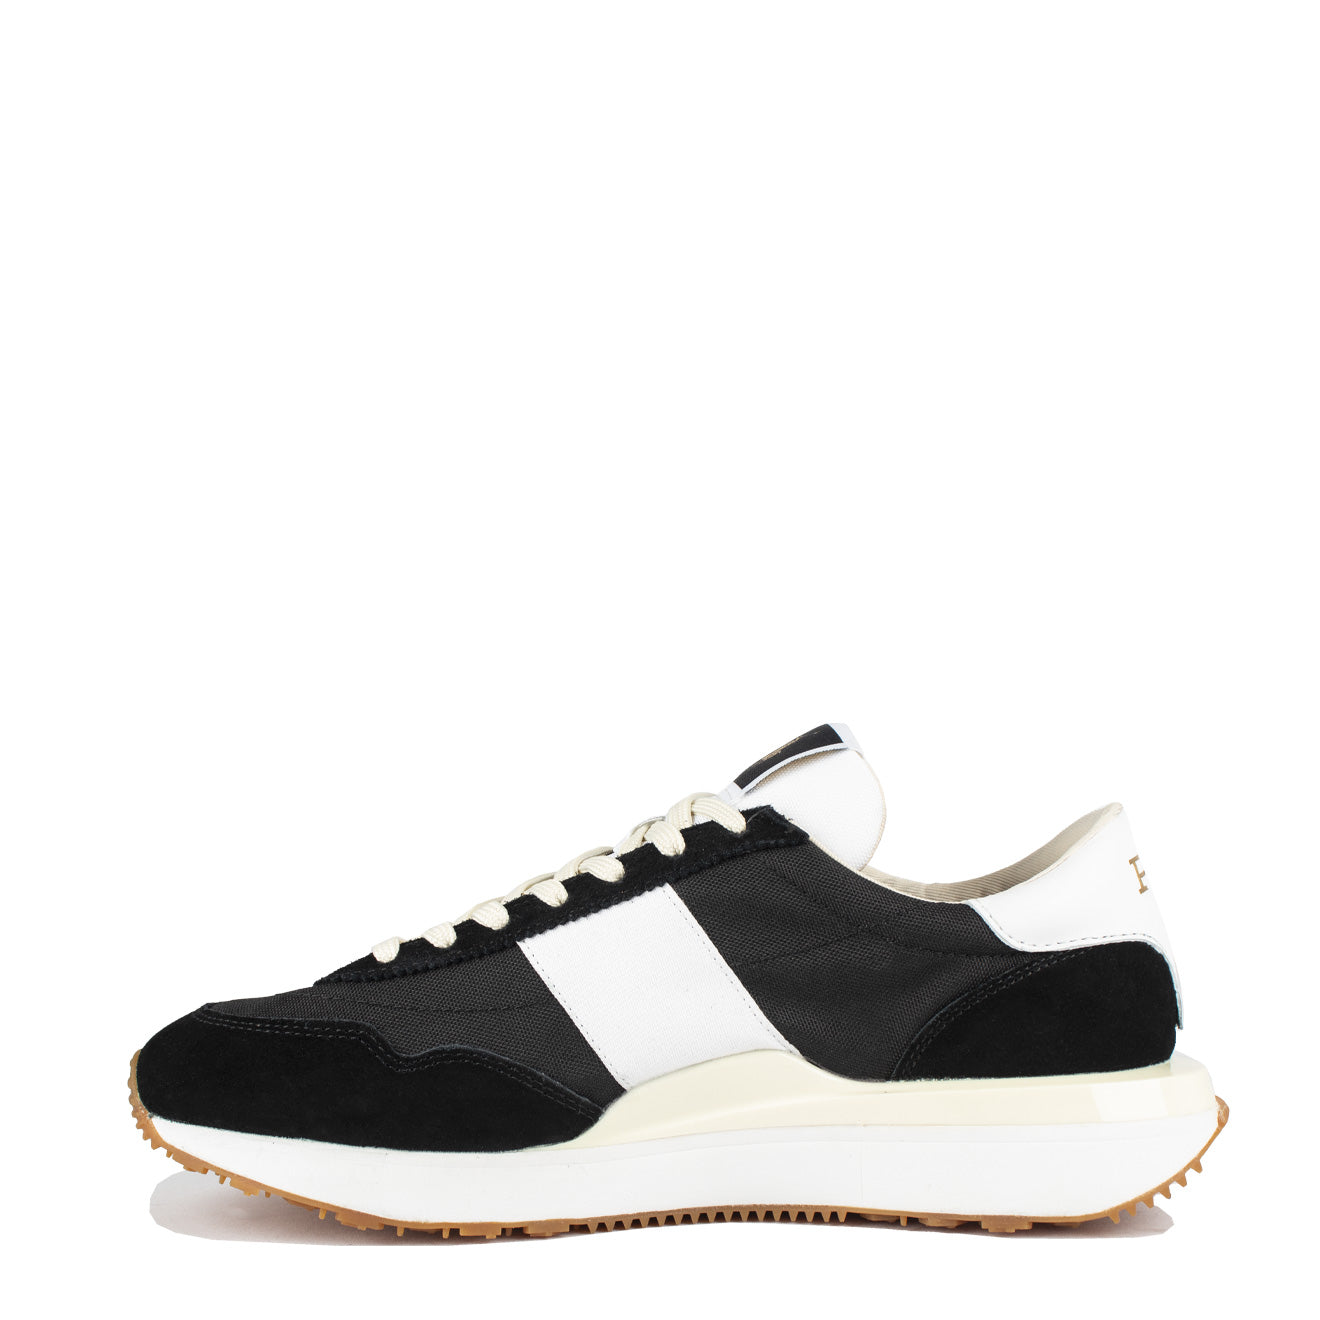 Polo Ralph Lauren Train 89 Suede and Oxford Trainer Black / White | The ...